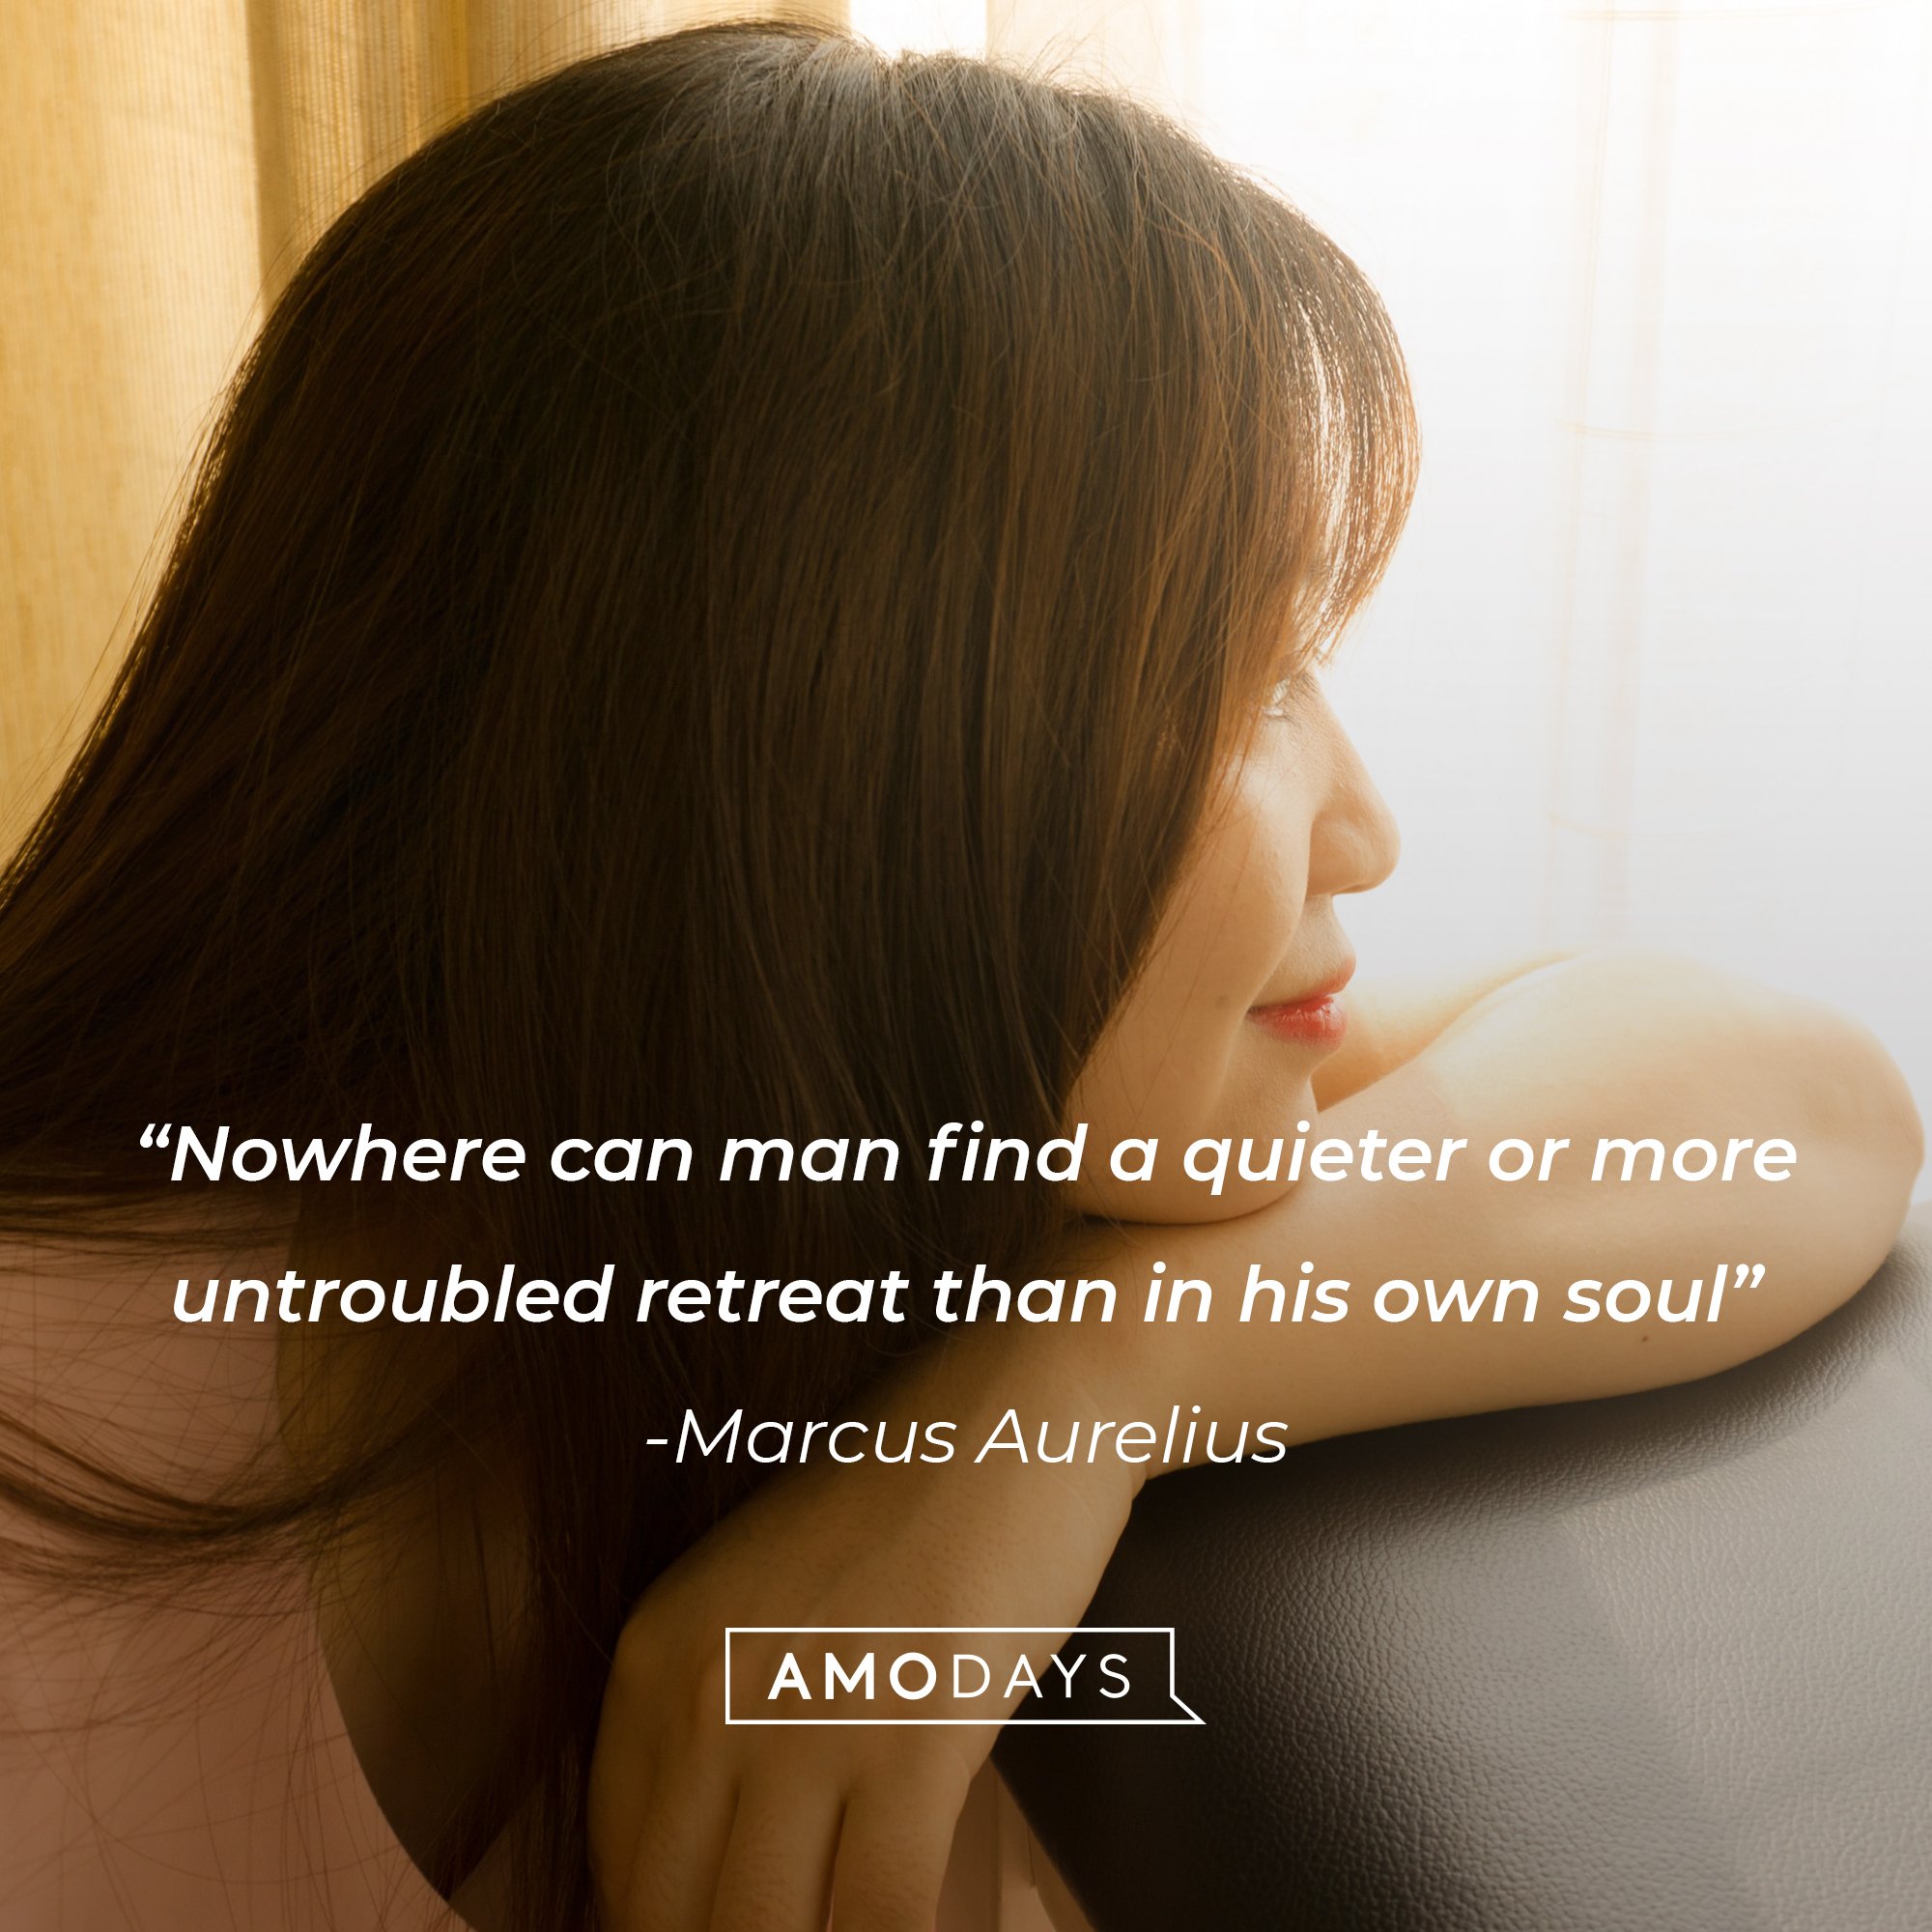  Marcus Aurelius's quote: “Nowhere can man find a quieter or more untroubled retreat than in his own soul.”| Image: AmoDays